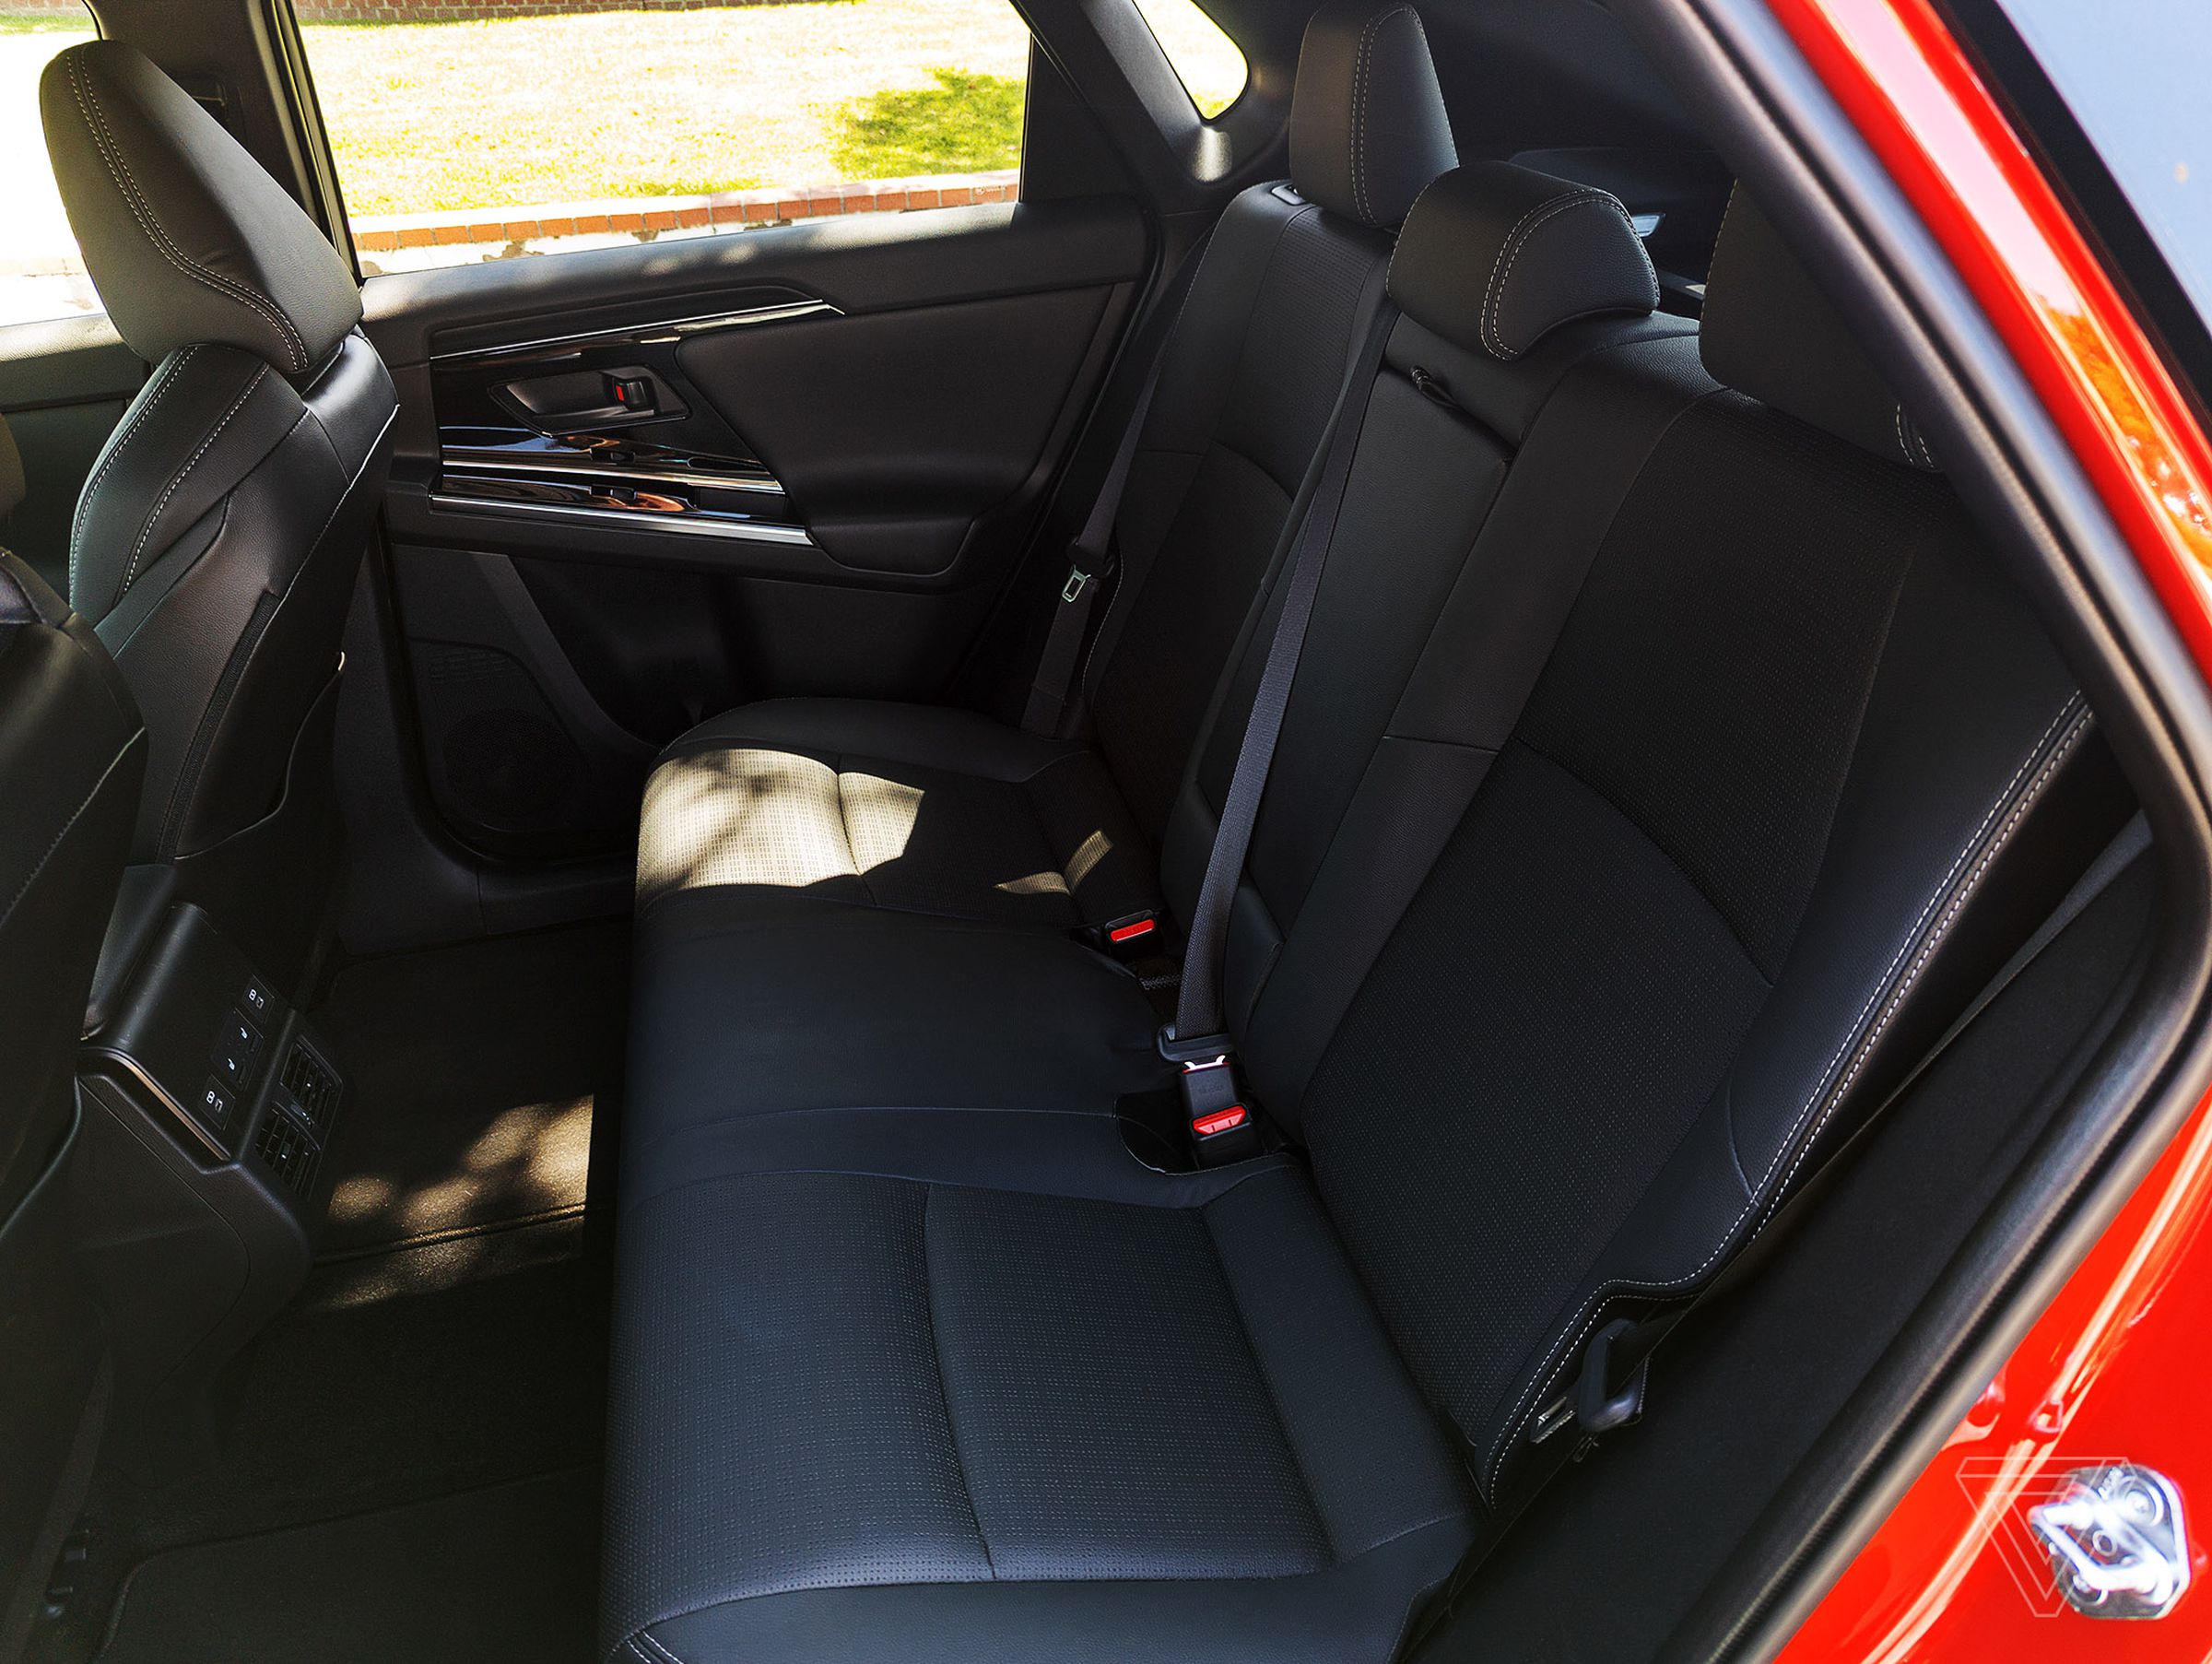 The back seats are firm, flat, and not that comfortable, but there is plenty of legroom.